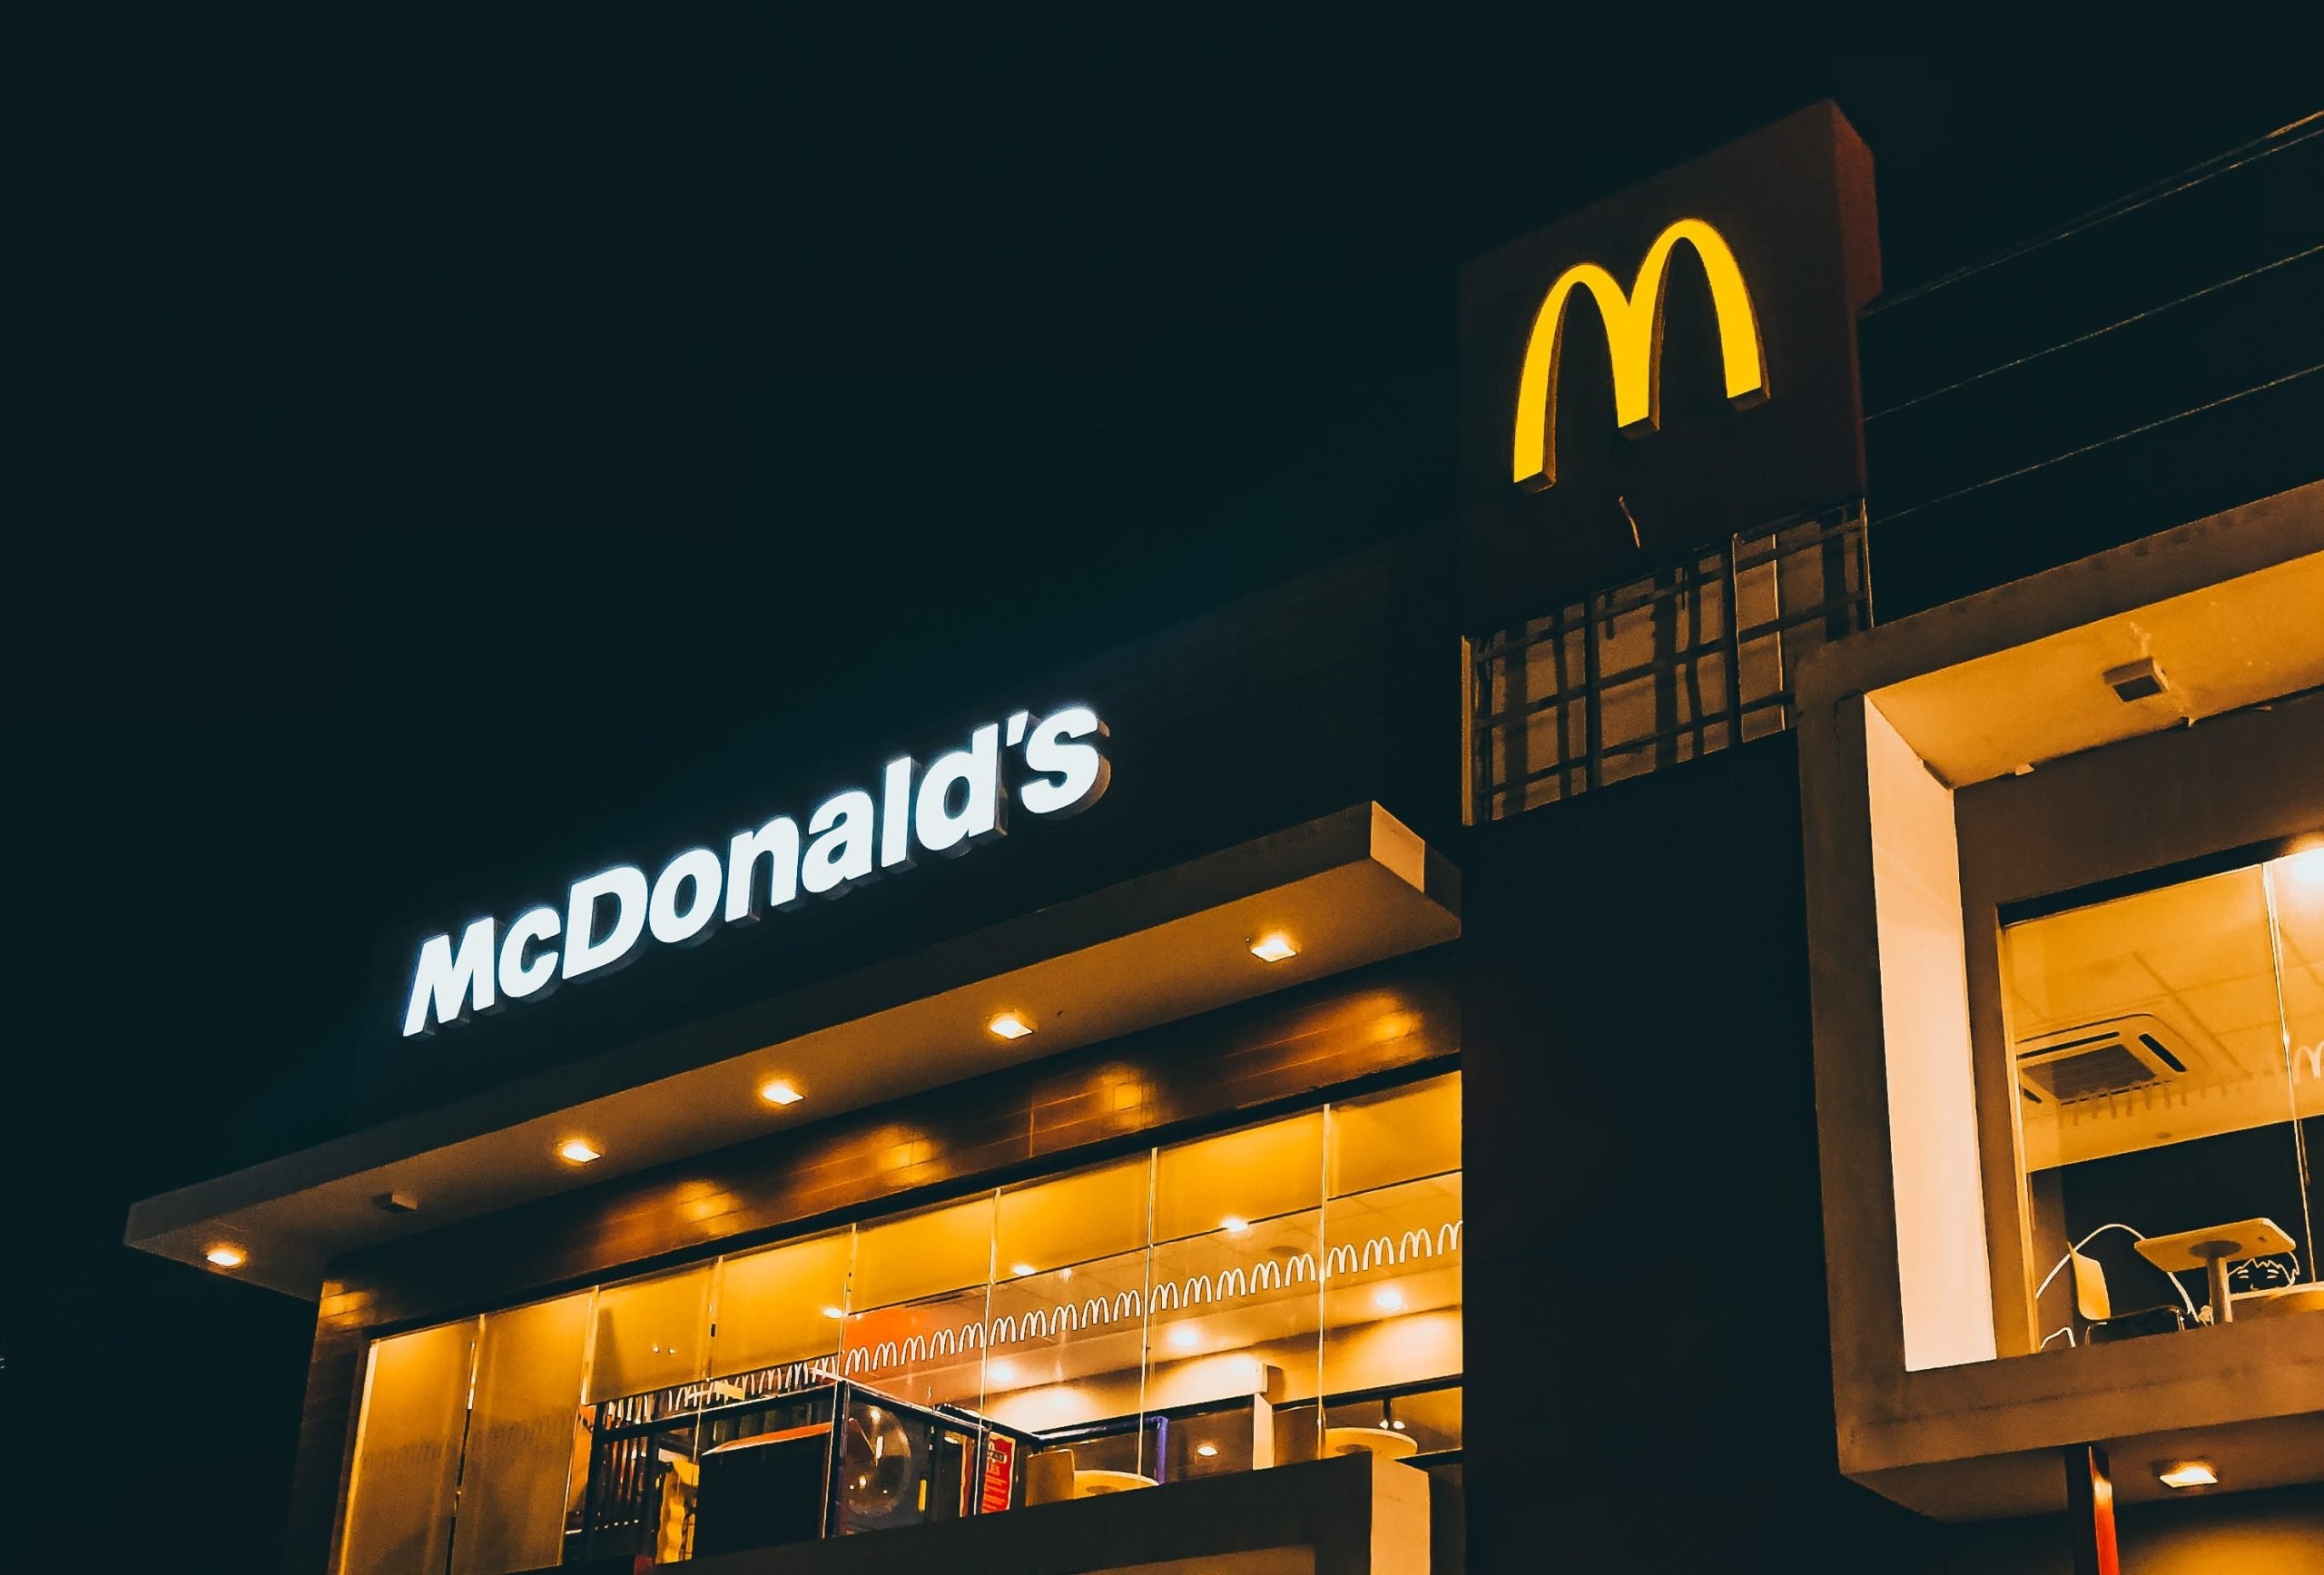 McDonald’s teams up with Google Cloud for AI and edge use cases